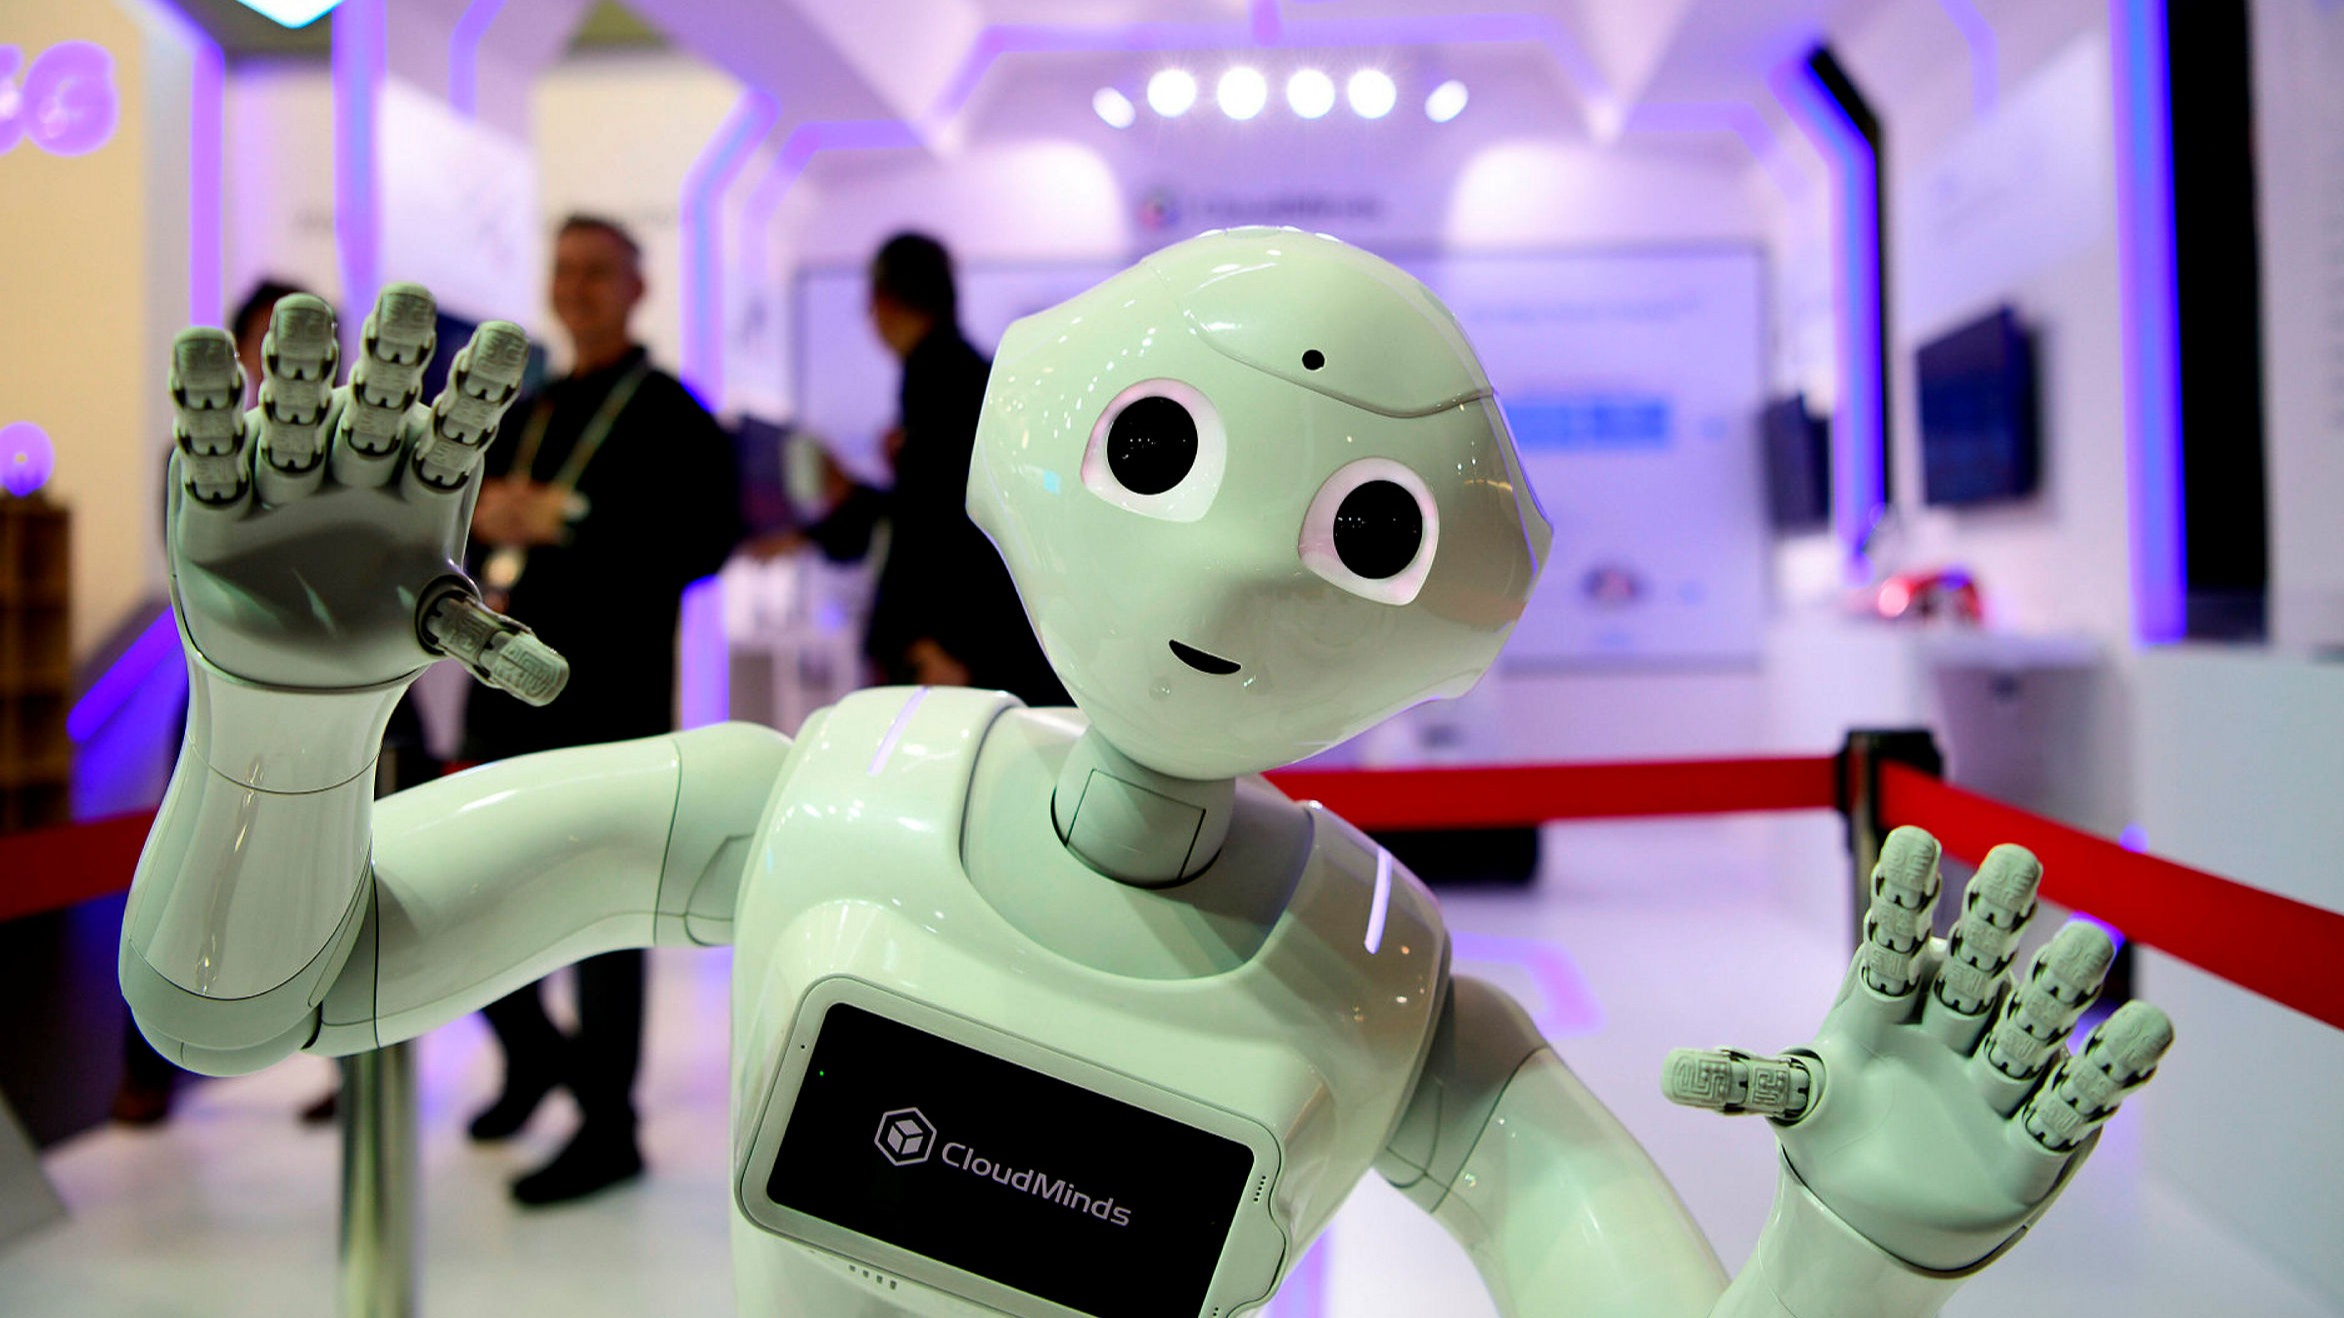 We should not mourn the passing of Pepper the robot | Financial Times